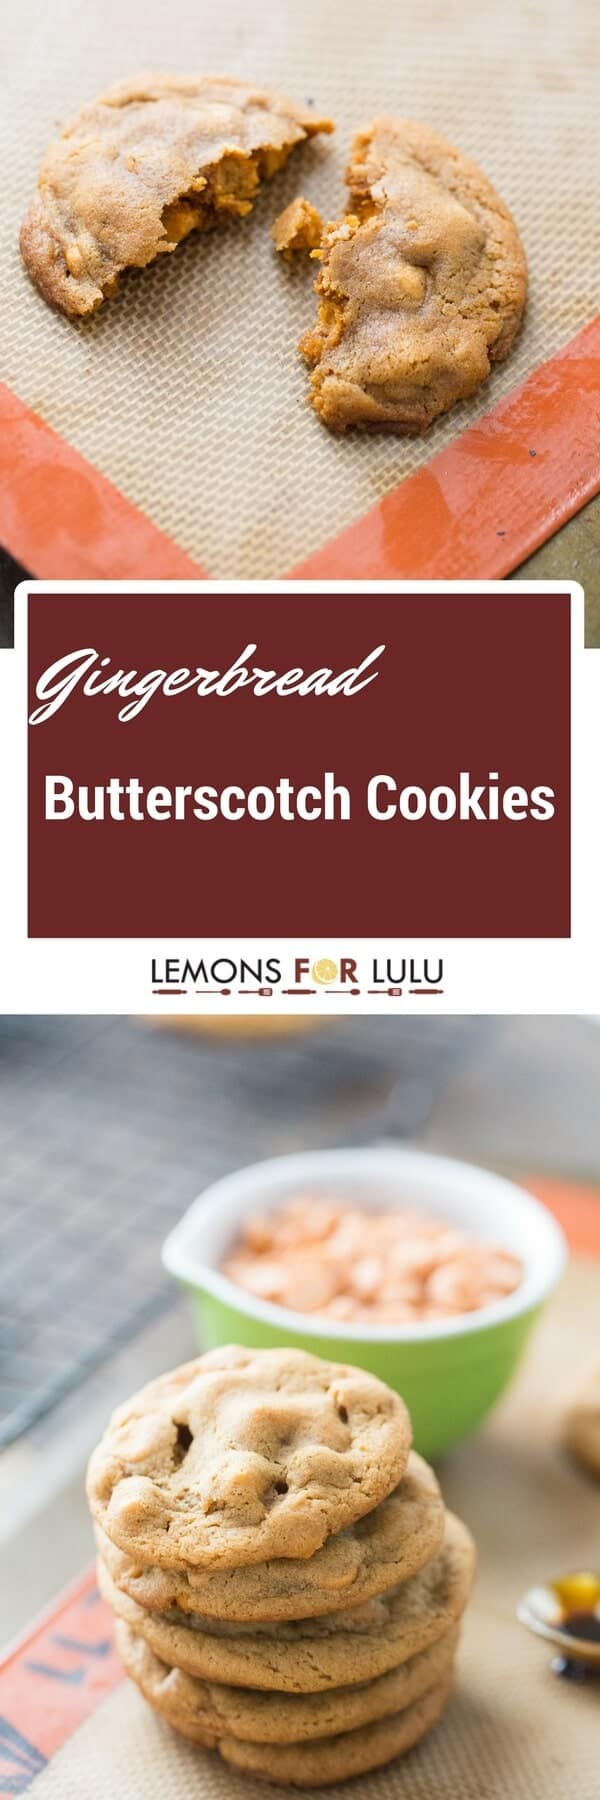 Warm gingerbread gives you a cozy feeling while you munch on these easy gingerbread cookies. Butterscotch chips add a uniquely sweet twist!